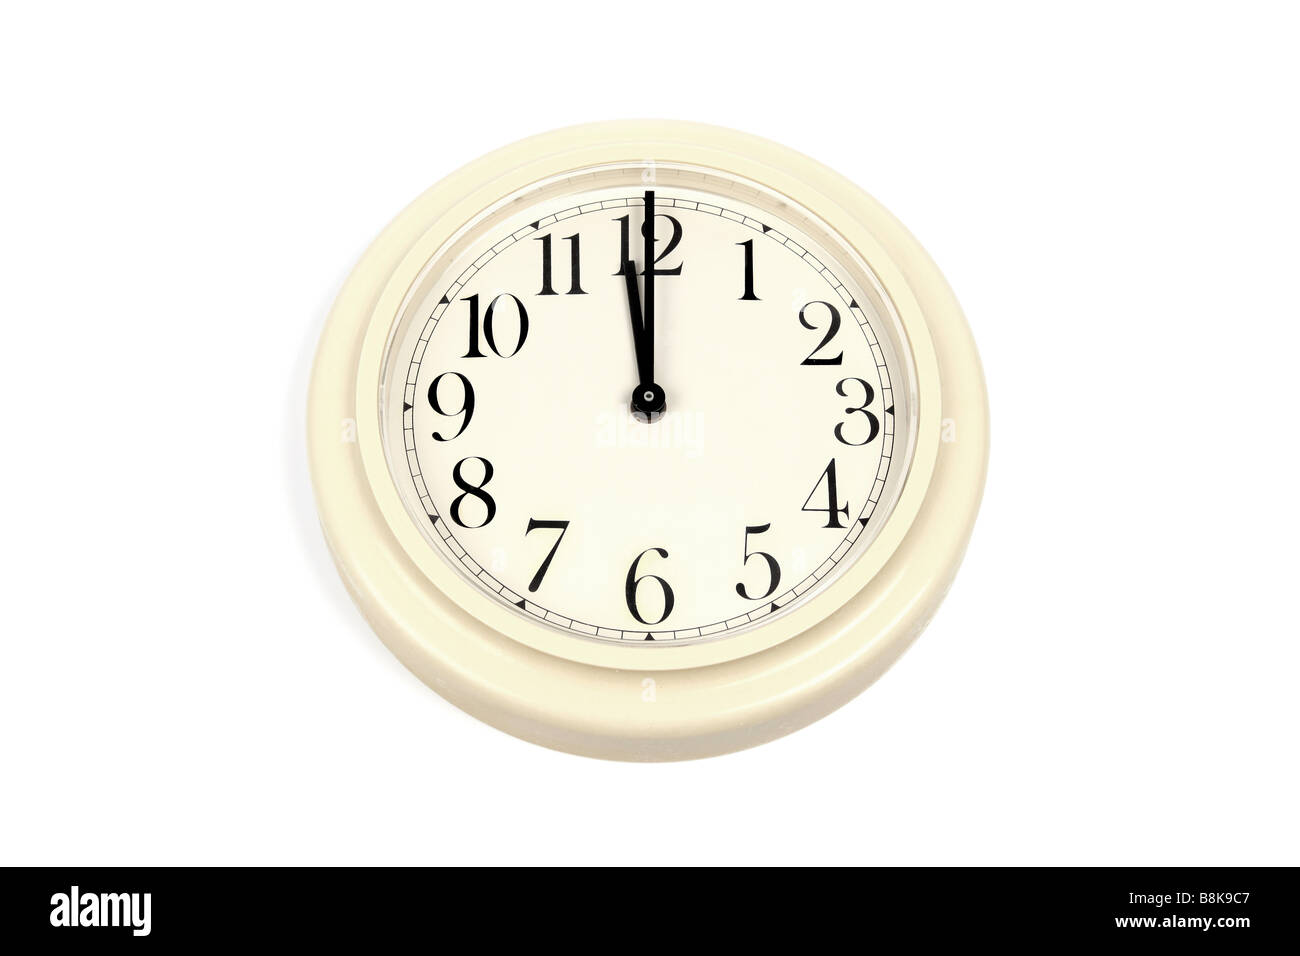 Wall clock against a white background Stock Photo